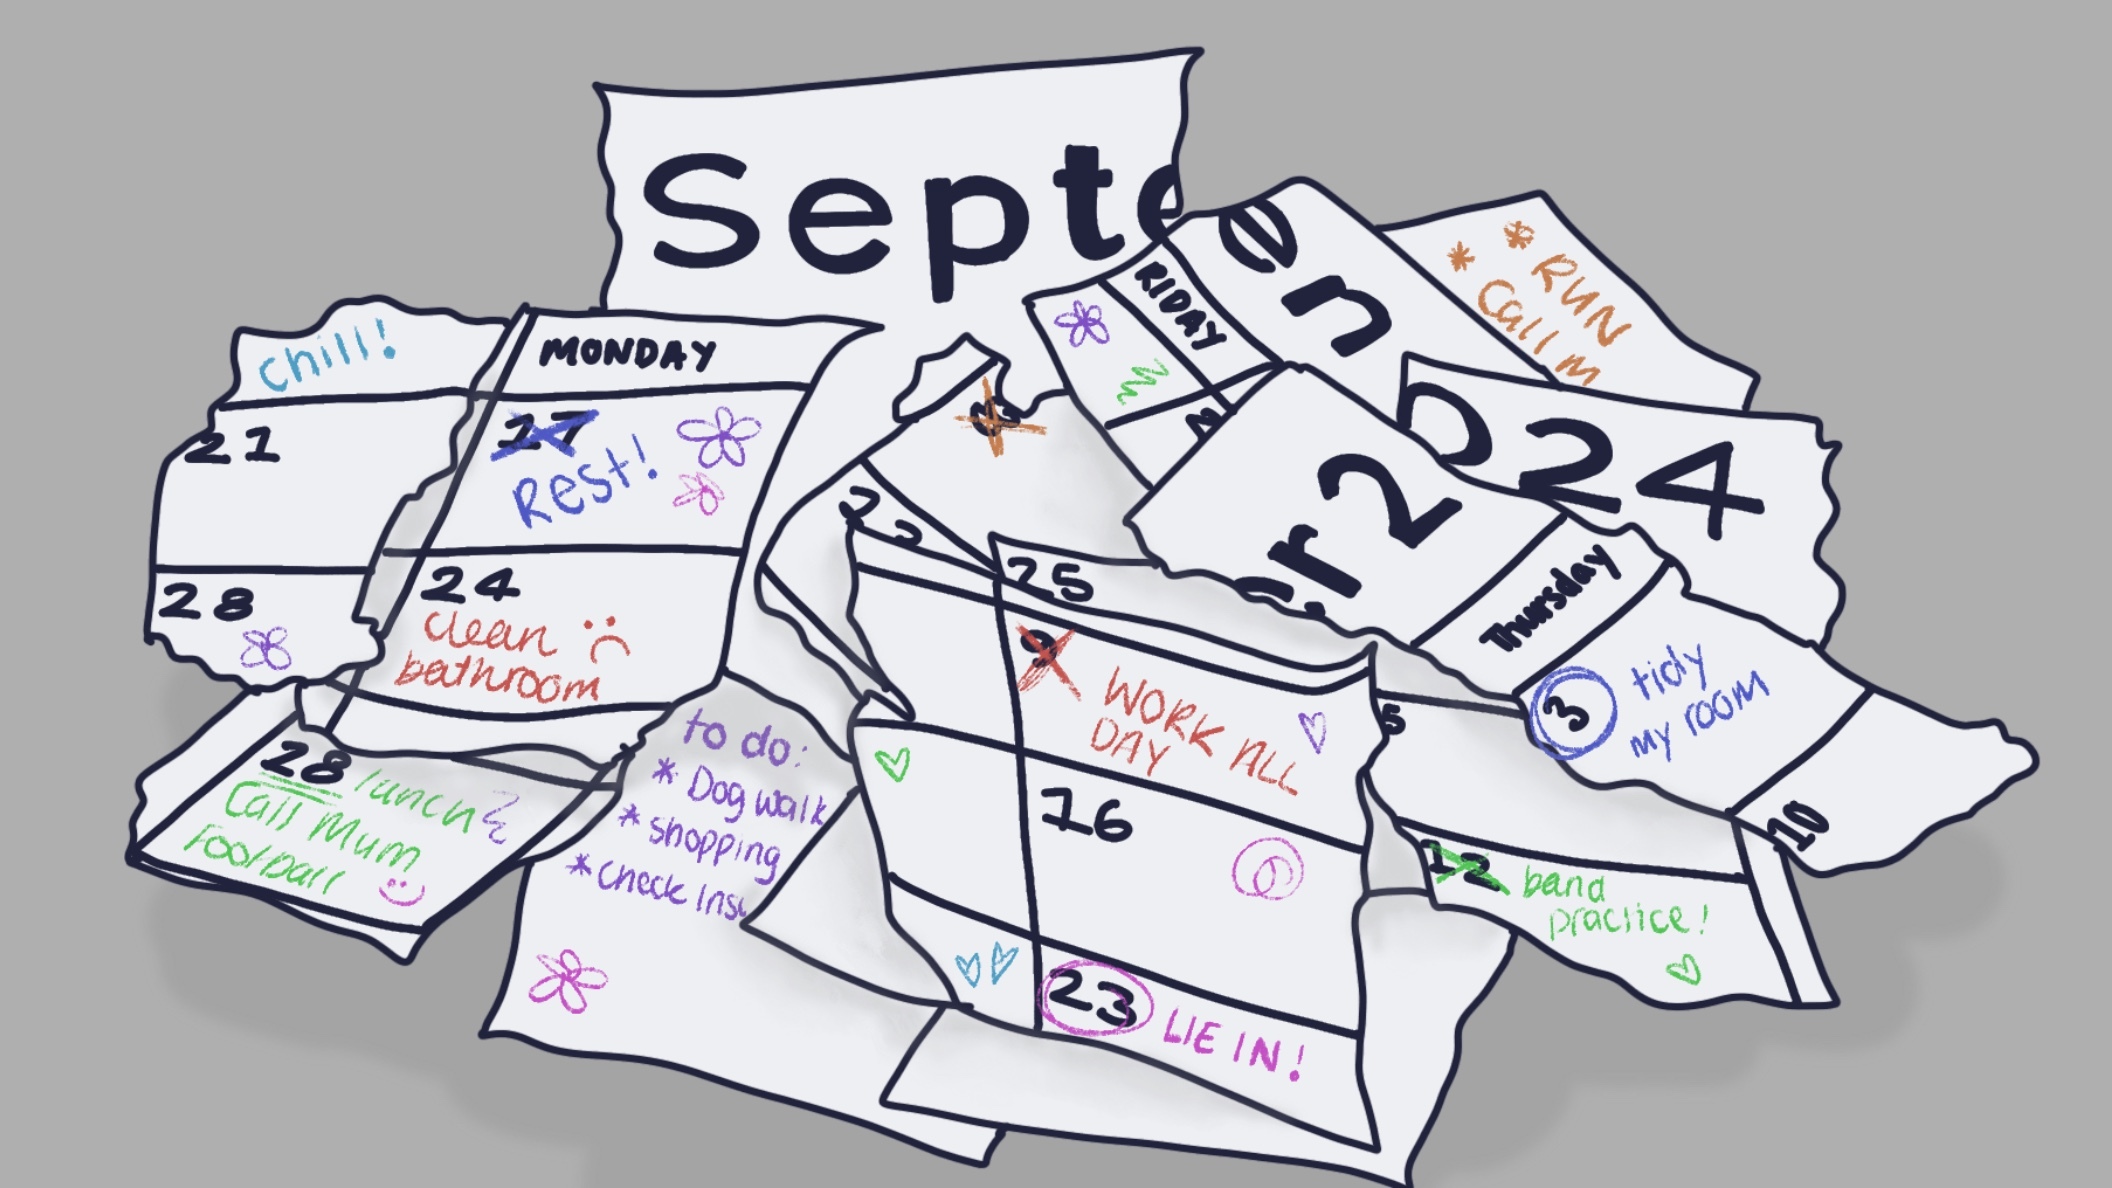 A pile of ripped up diaries and calendars.